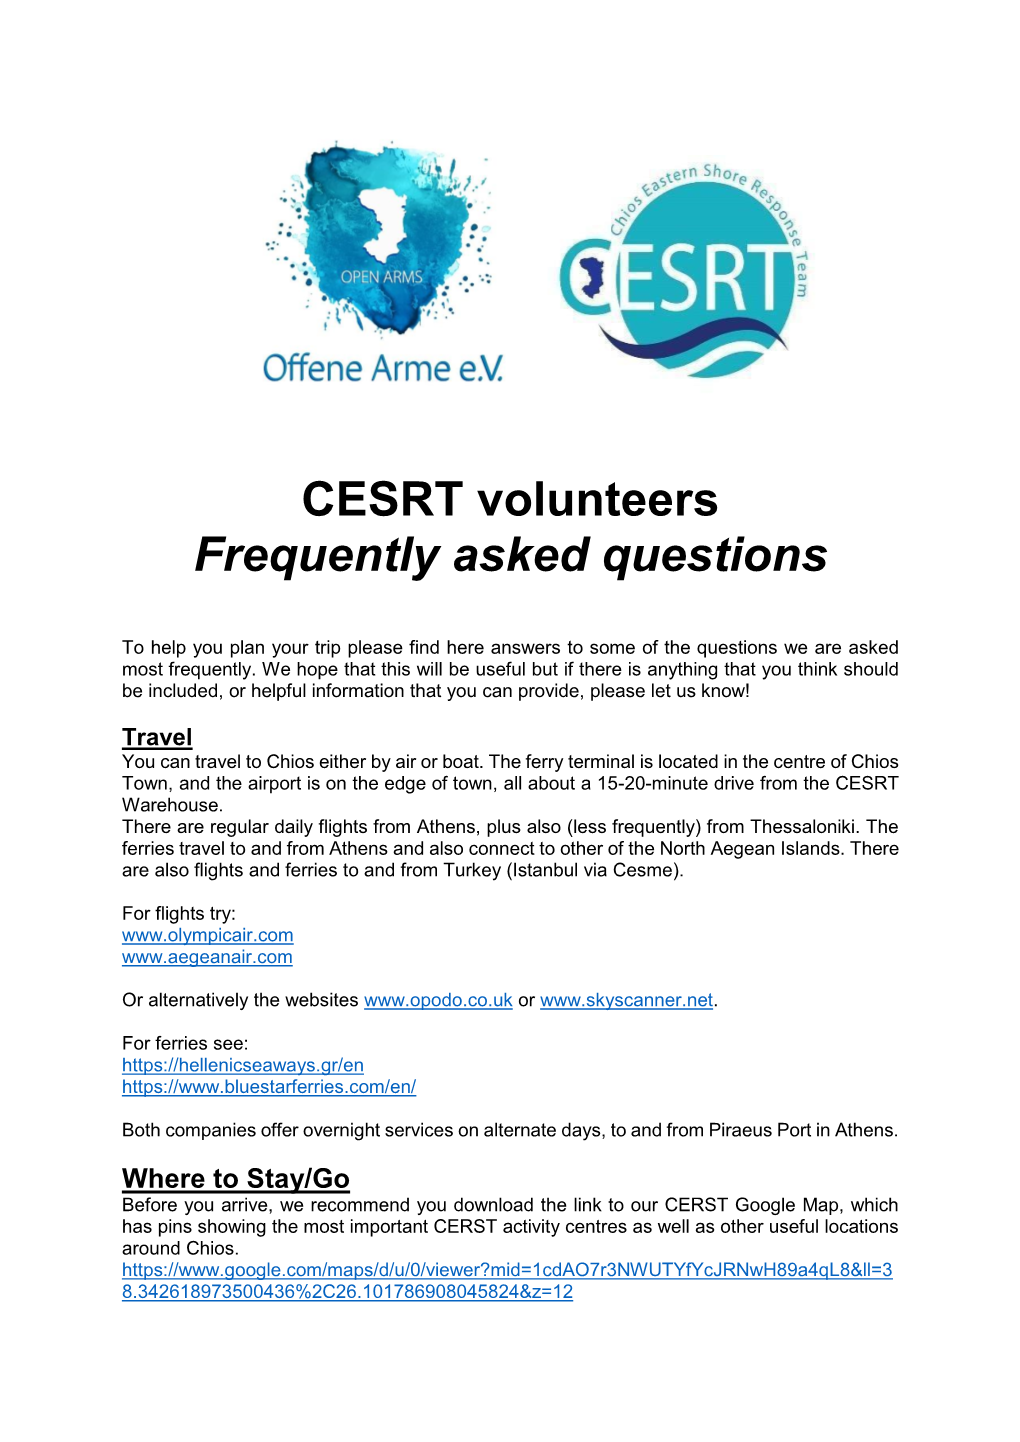 CESRT Volunteers Frequently Asked Questions